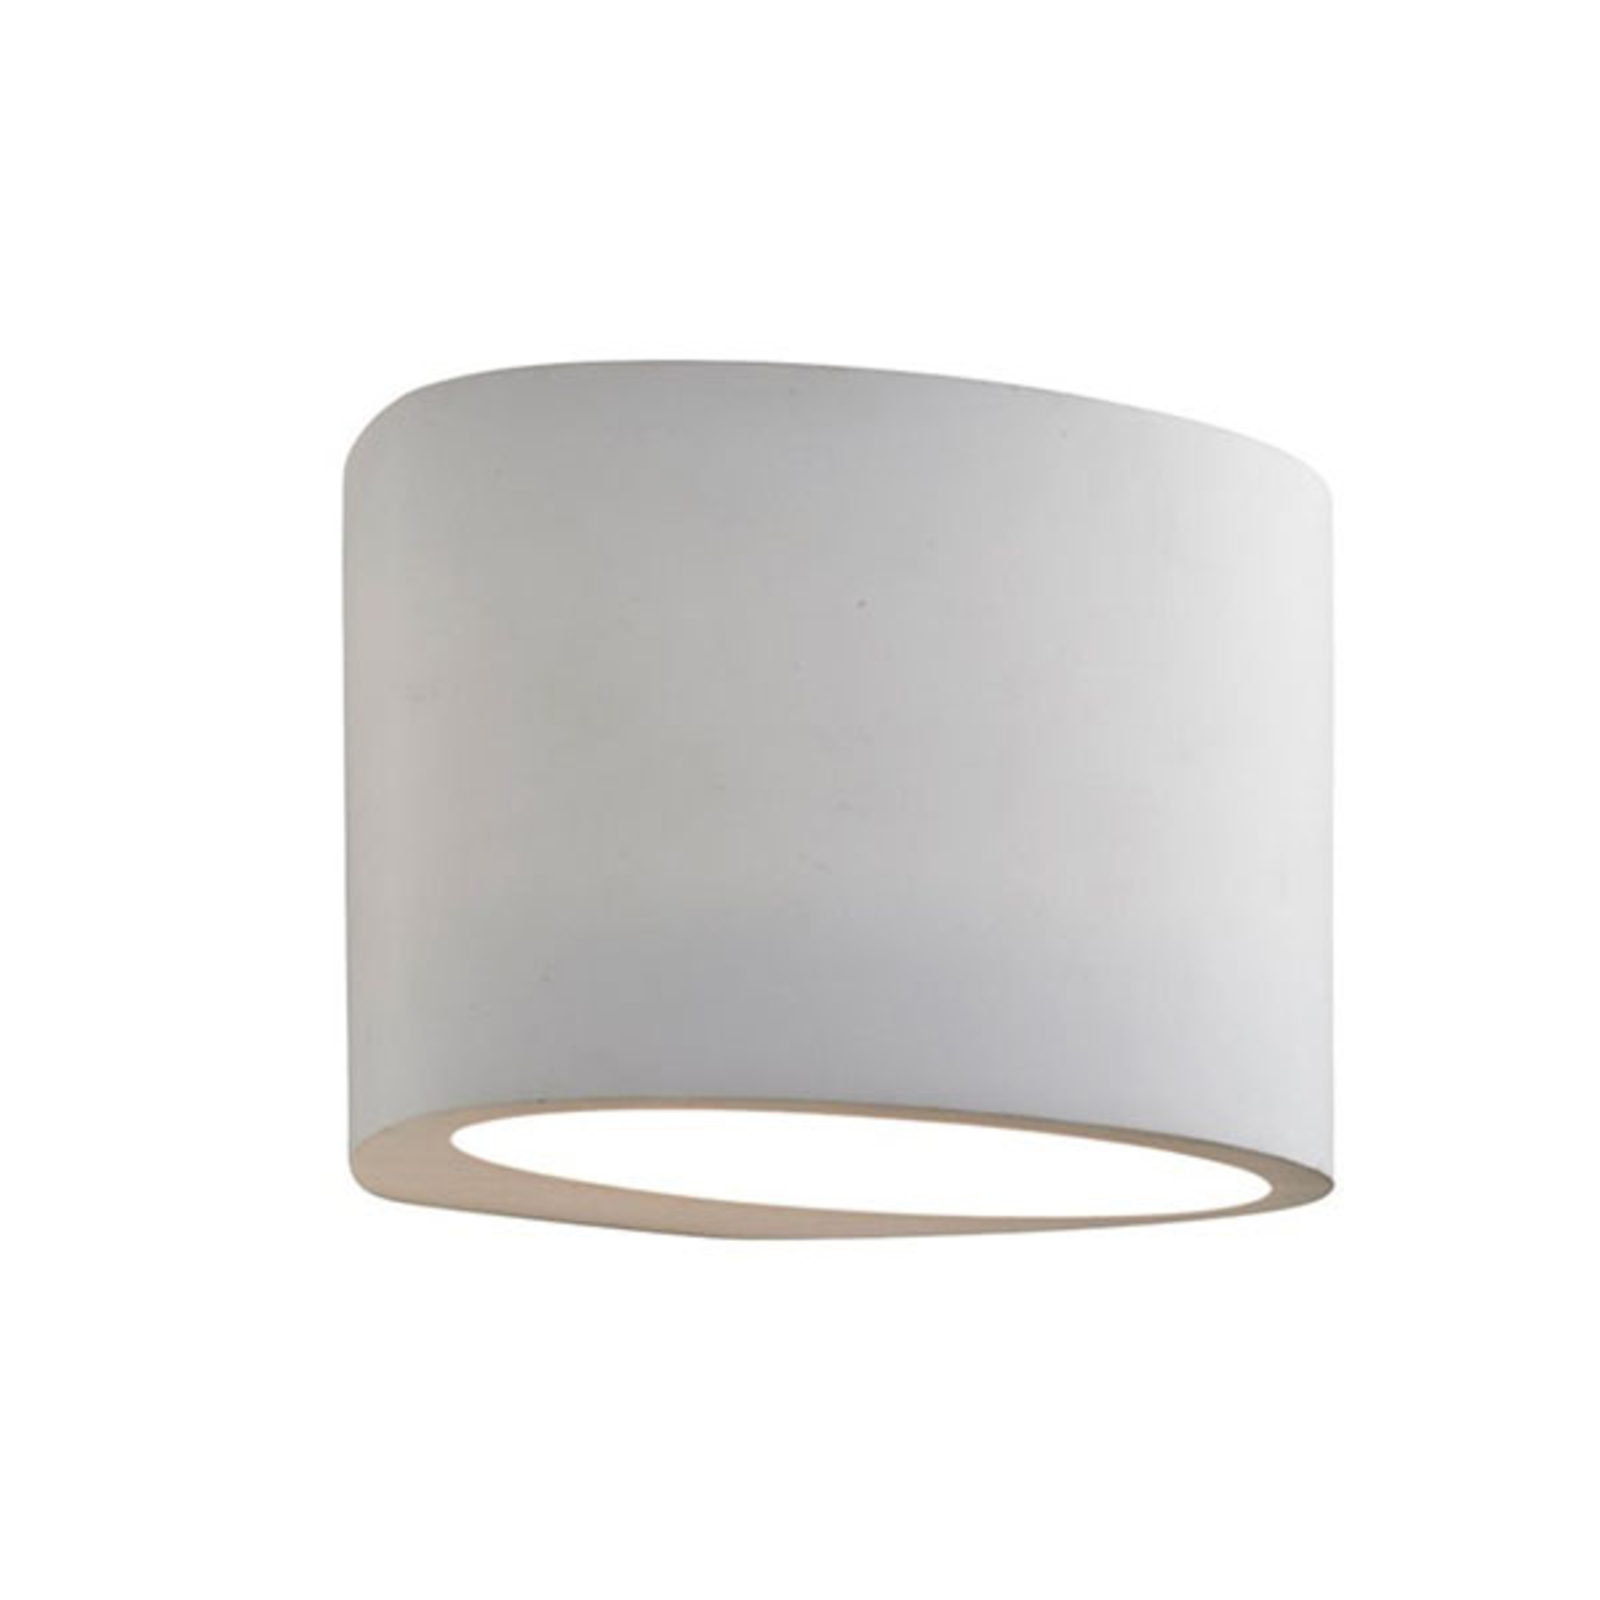 Searchlight 8436 Gypsum White Plaster Curved Cylinder Up & Down Wall Light